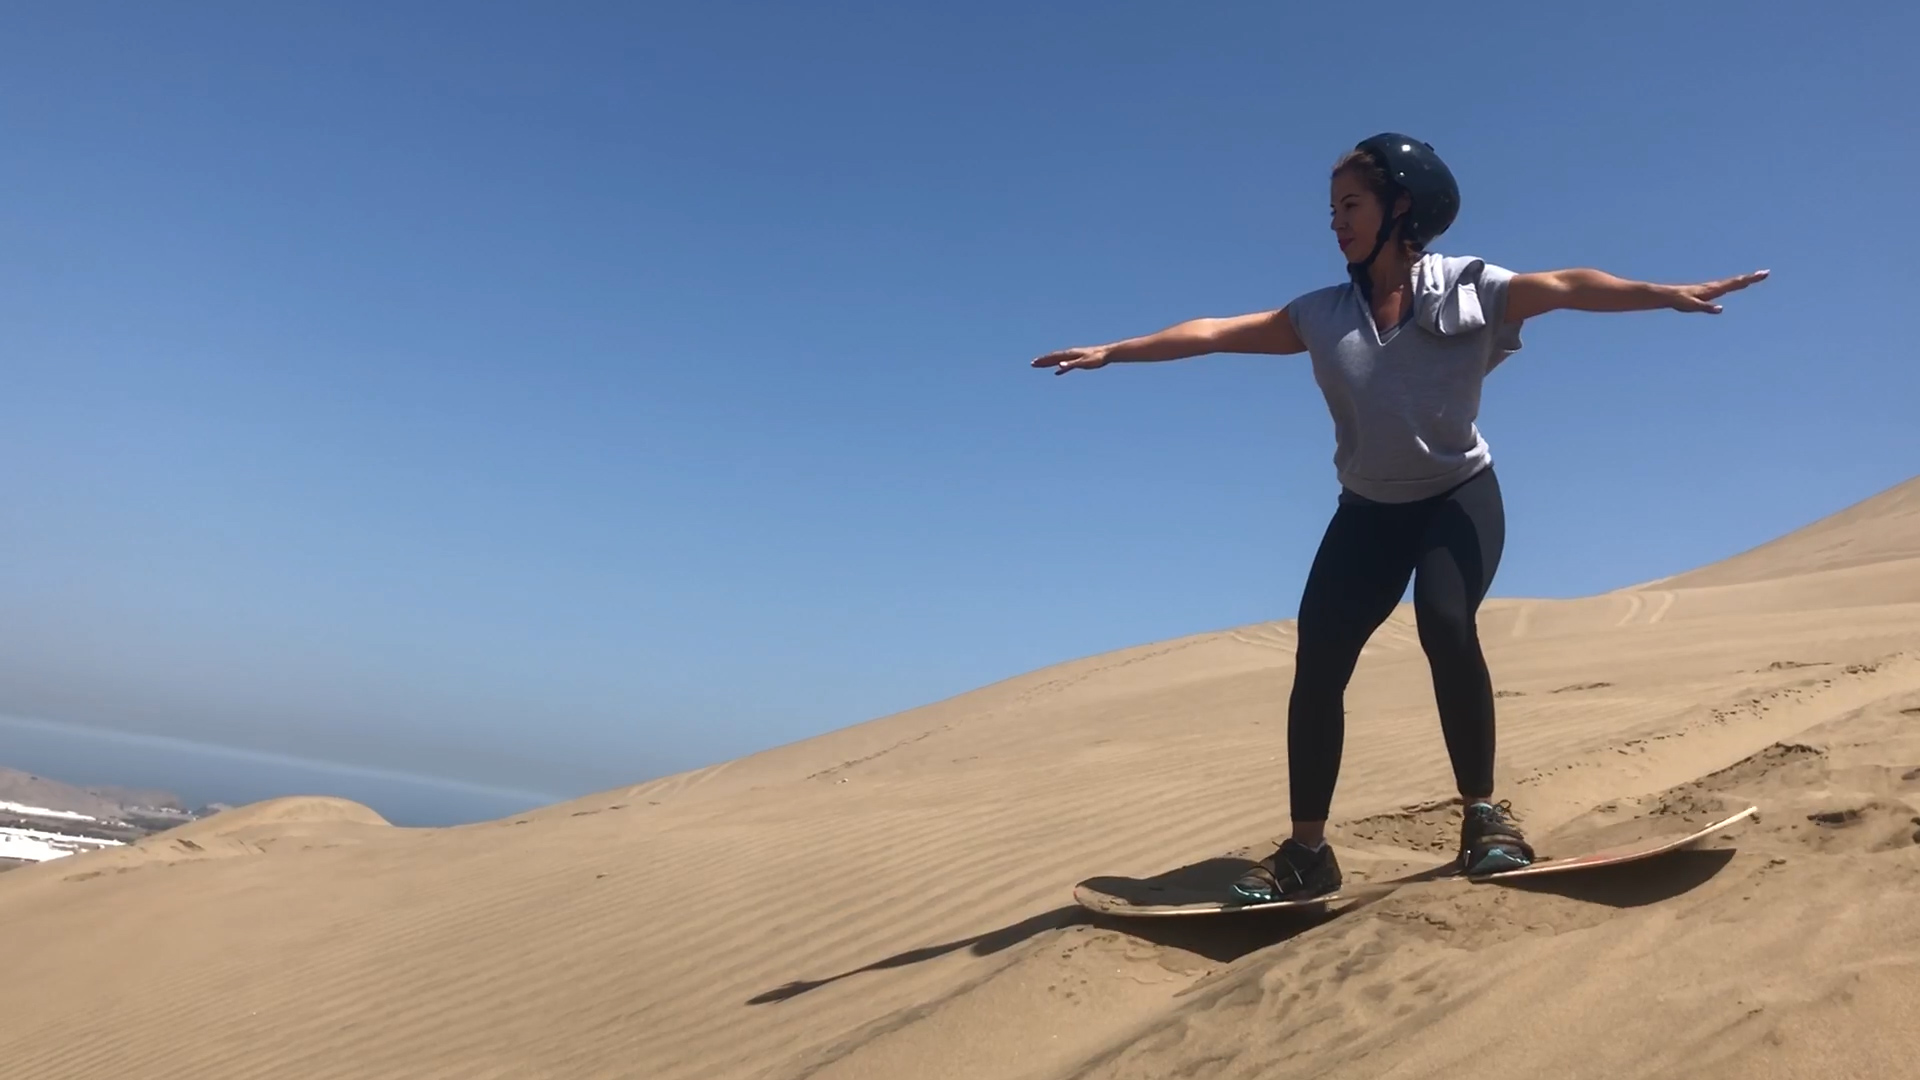 Sandboarding should be the next item on your bucket list!